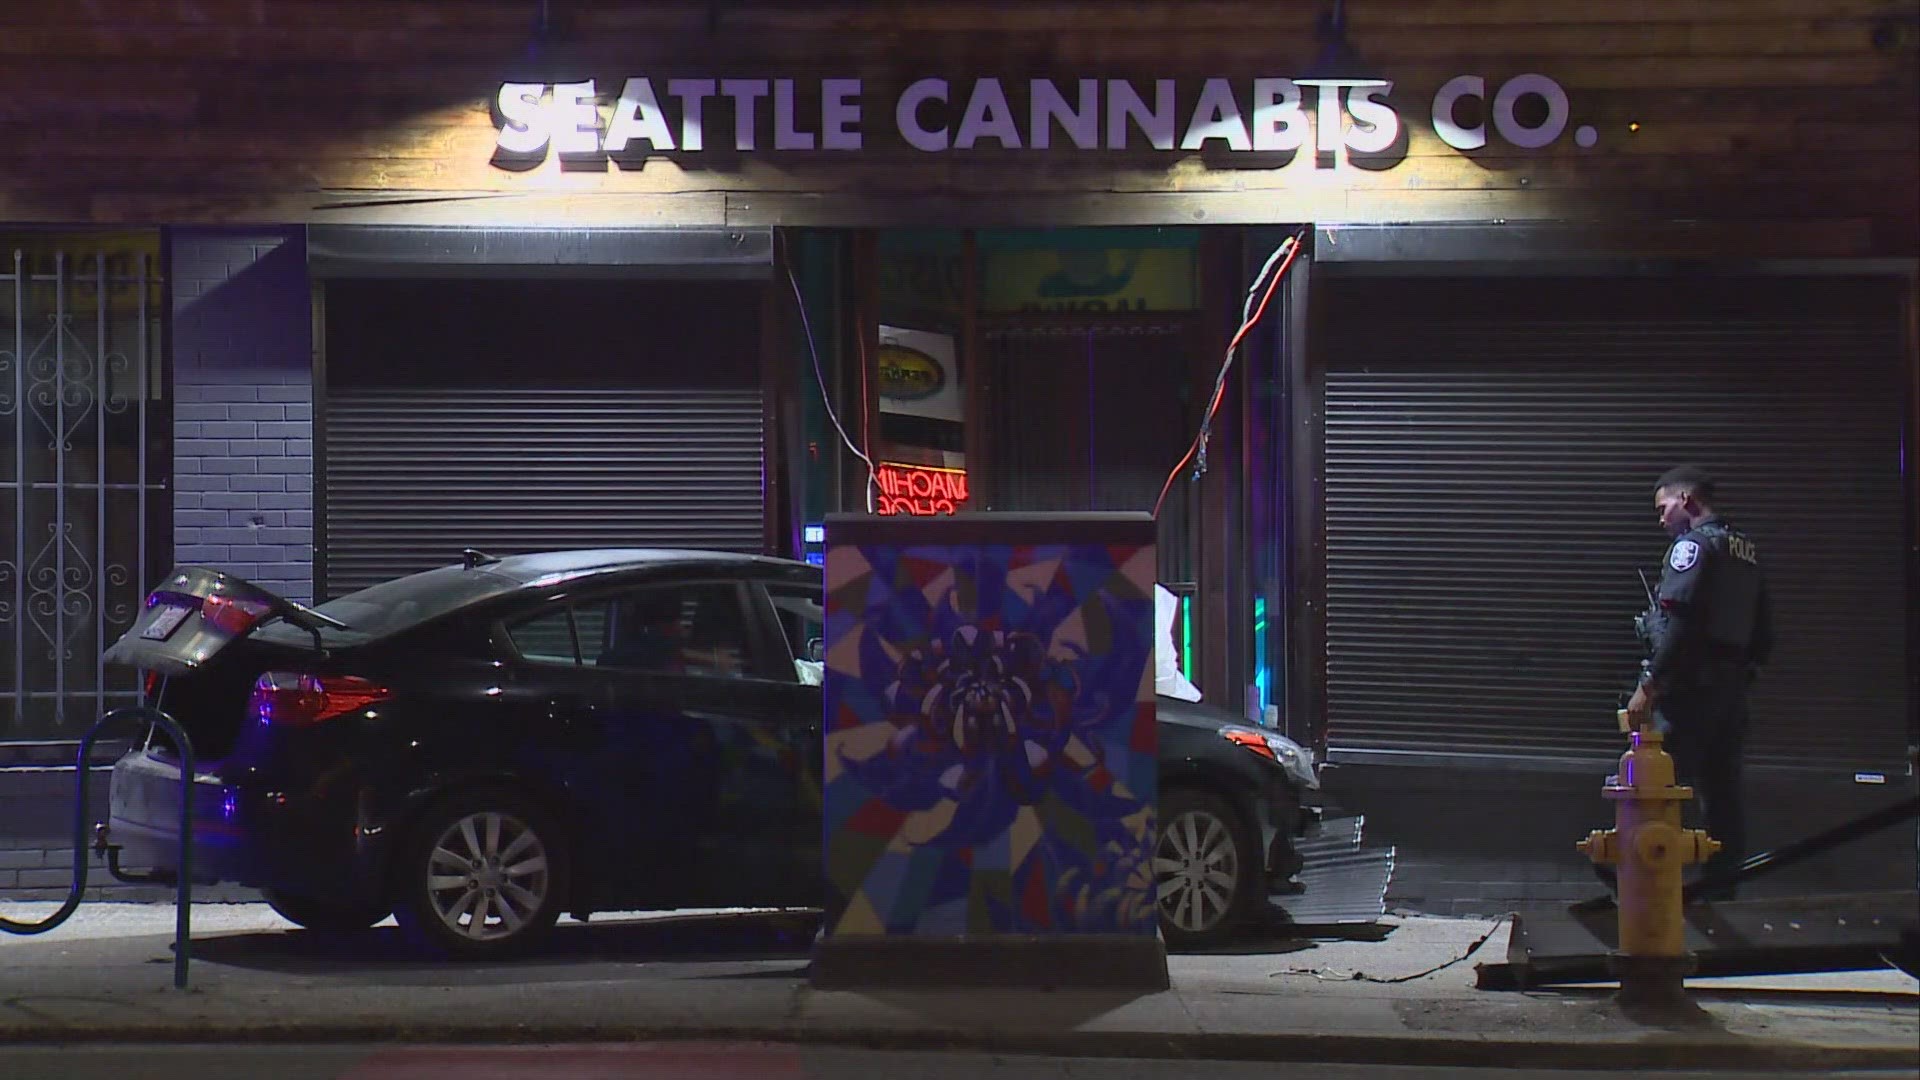 Thieves smashed a car into the front of Seattle Cannabis Company on Rainier Ave. S in Seattle early Thursday morning